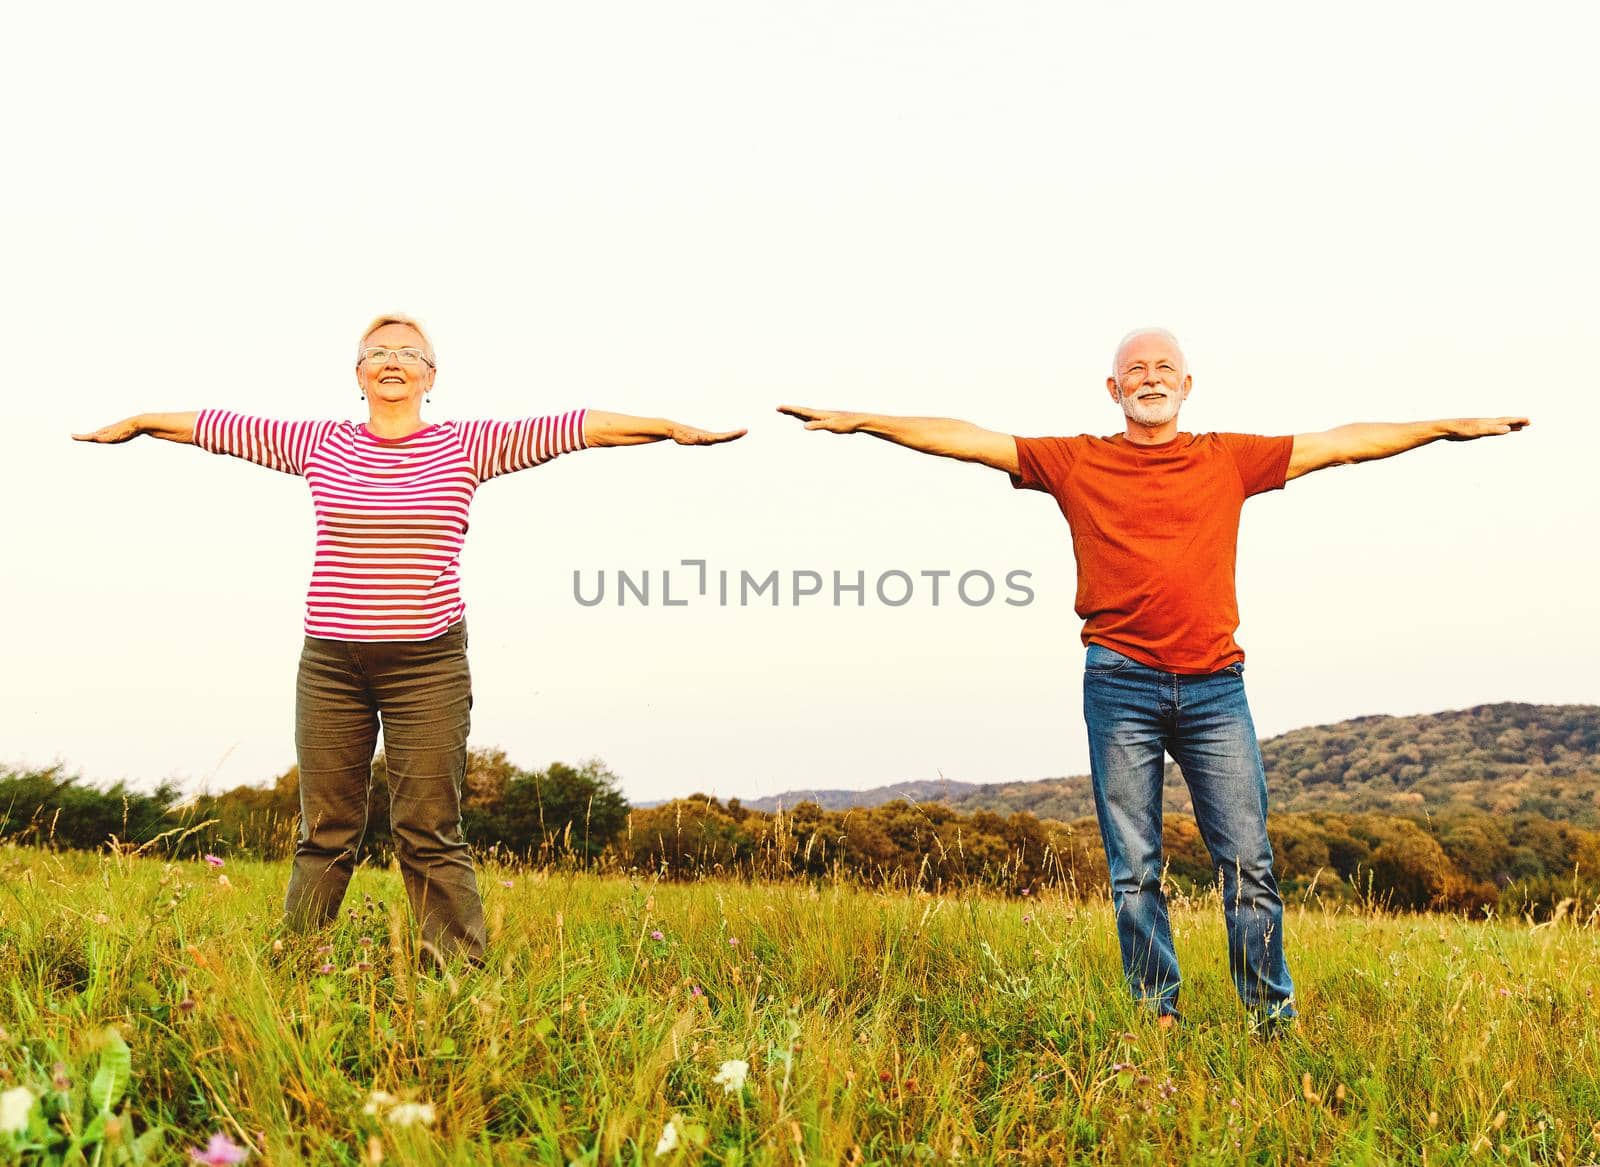 outdoor senior fitness woman man lifestyle active sport exercise healthy fit retirement stretching elderly couple by Picsfive